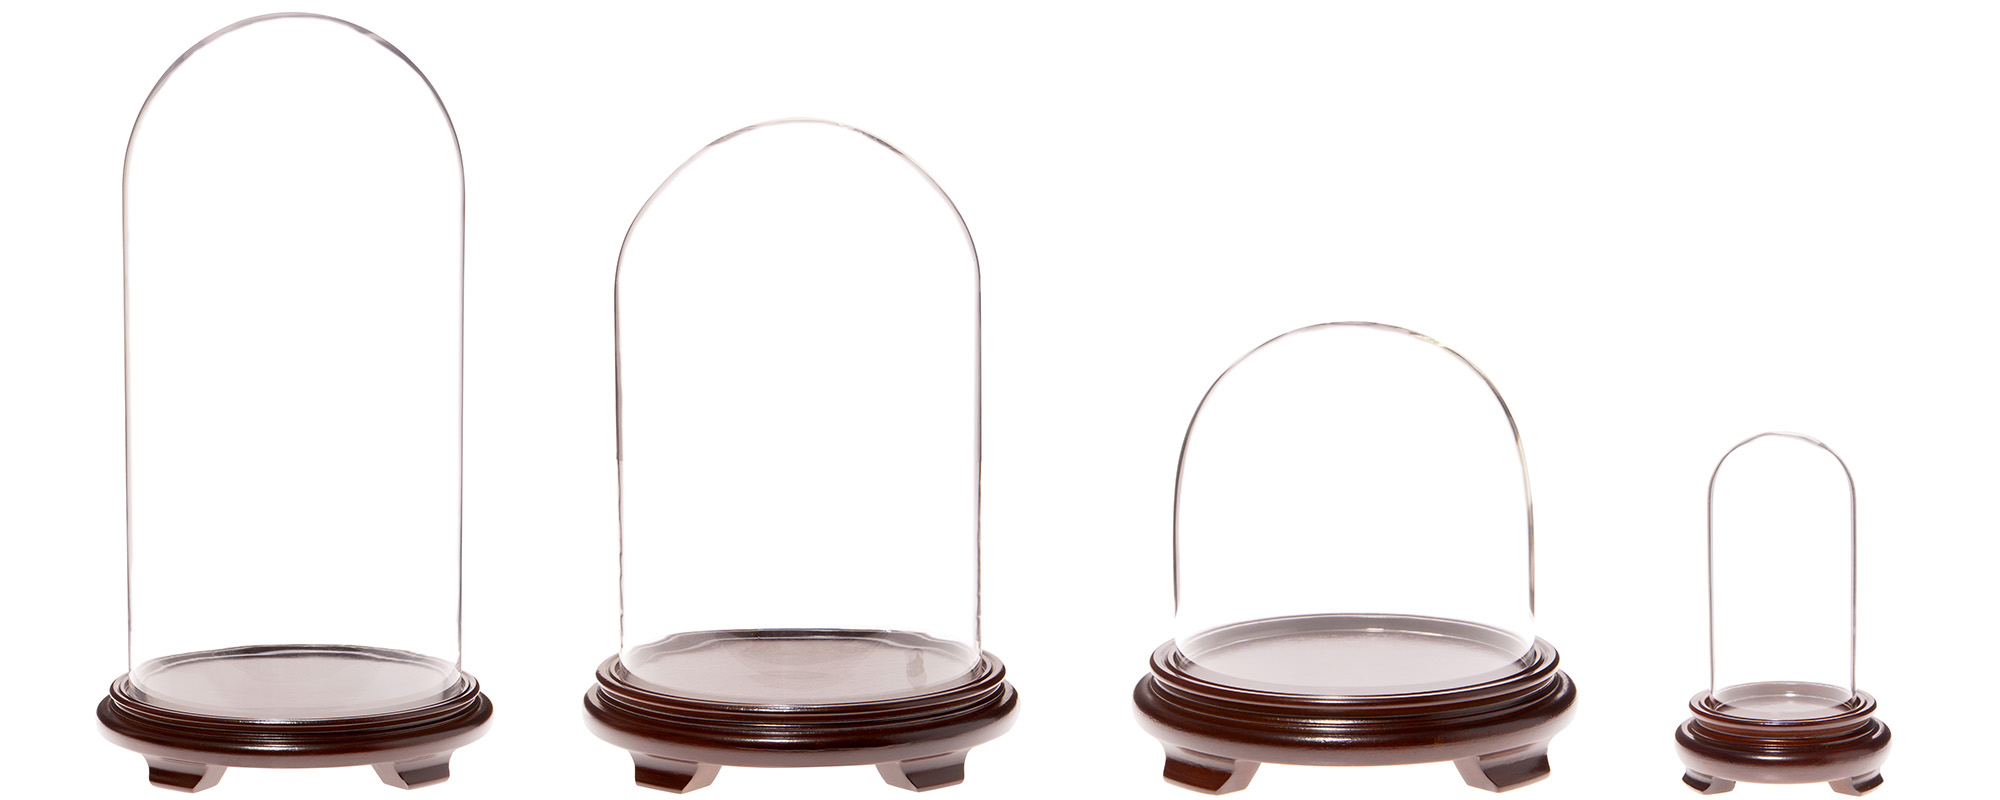 Glass Domes with Walnut Wood Veneer Footed Bases